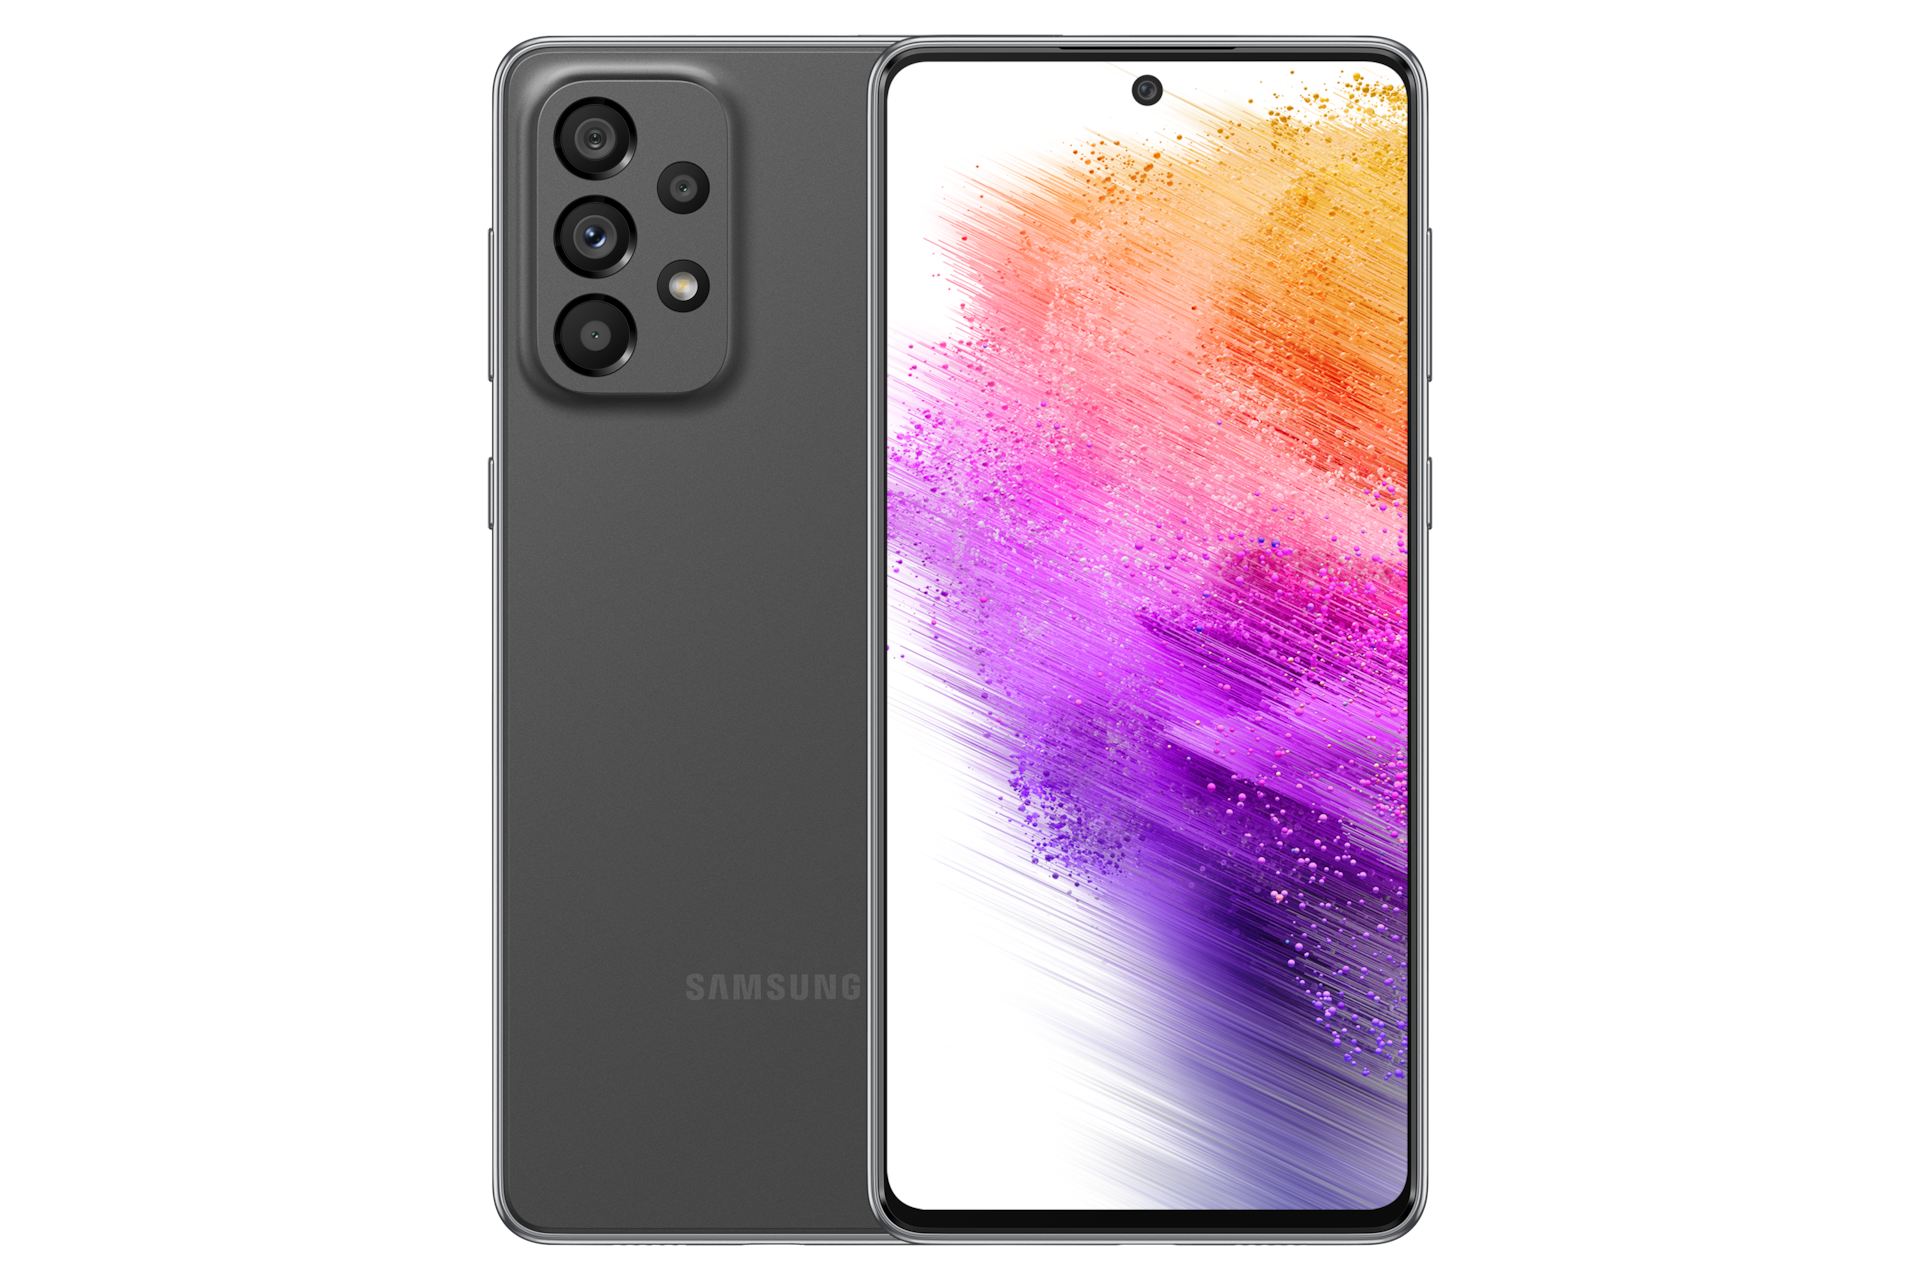 Shop Samsung A73 at the best price and view the price, specs, discounts, promo, and release date at Samsung Store in the Philippines. Two  Samsung A73 256GB devices in Awesome Gray, one shows the front, while the other one shows the rear